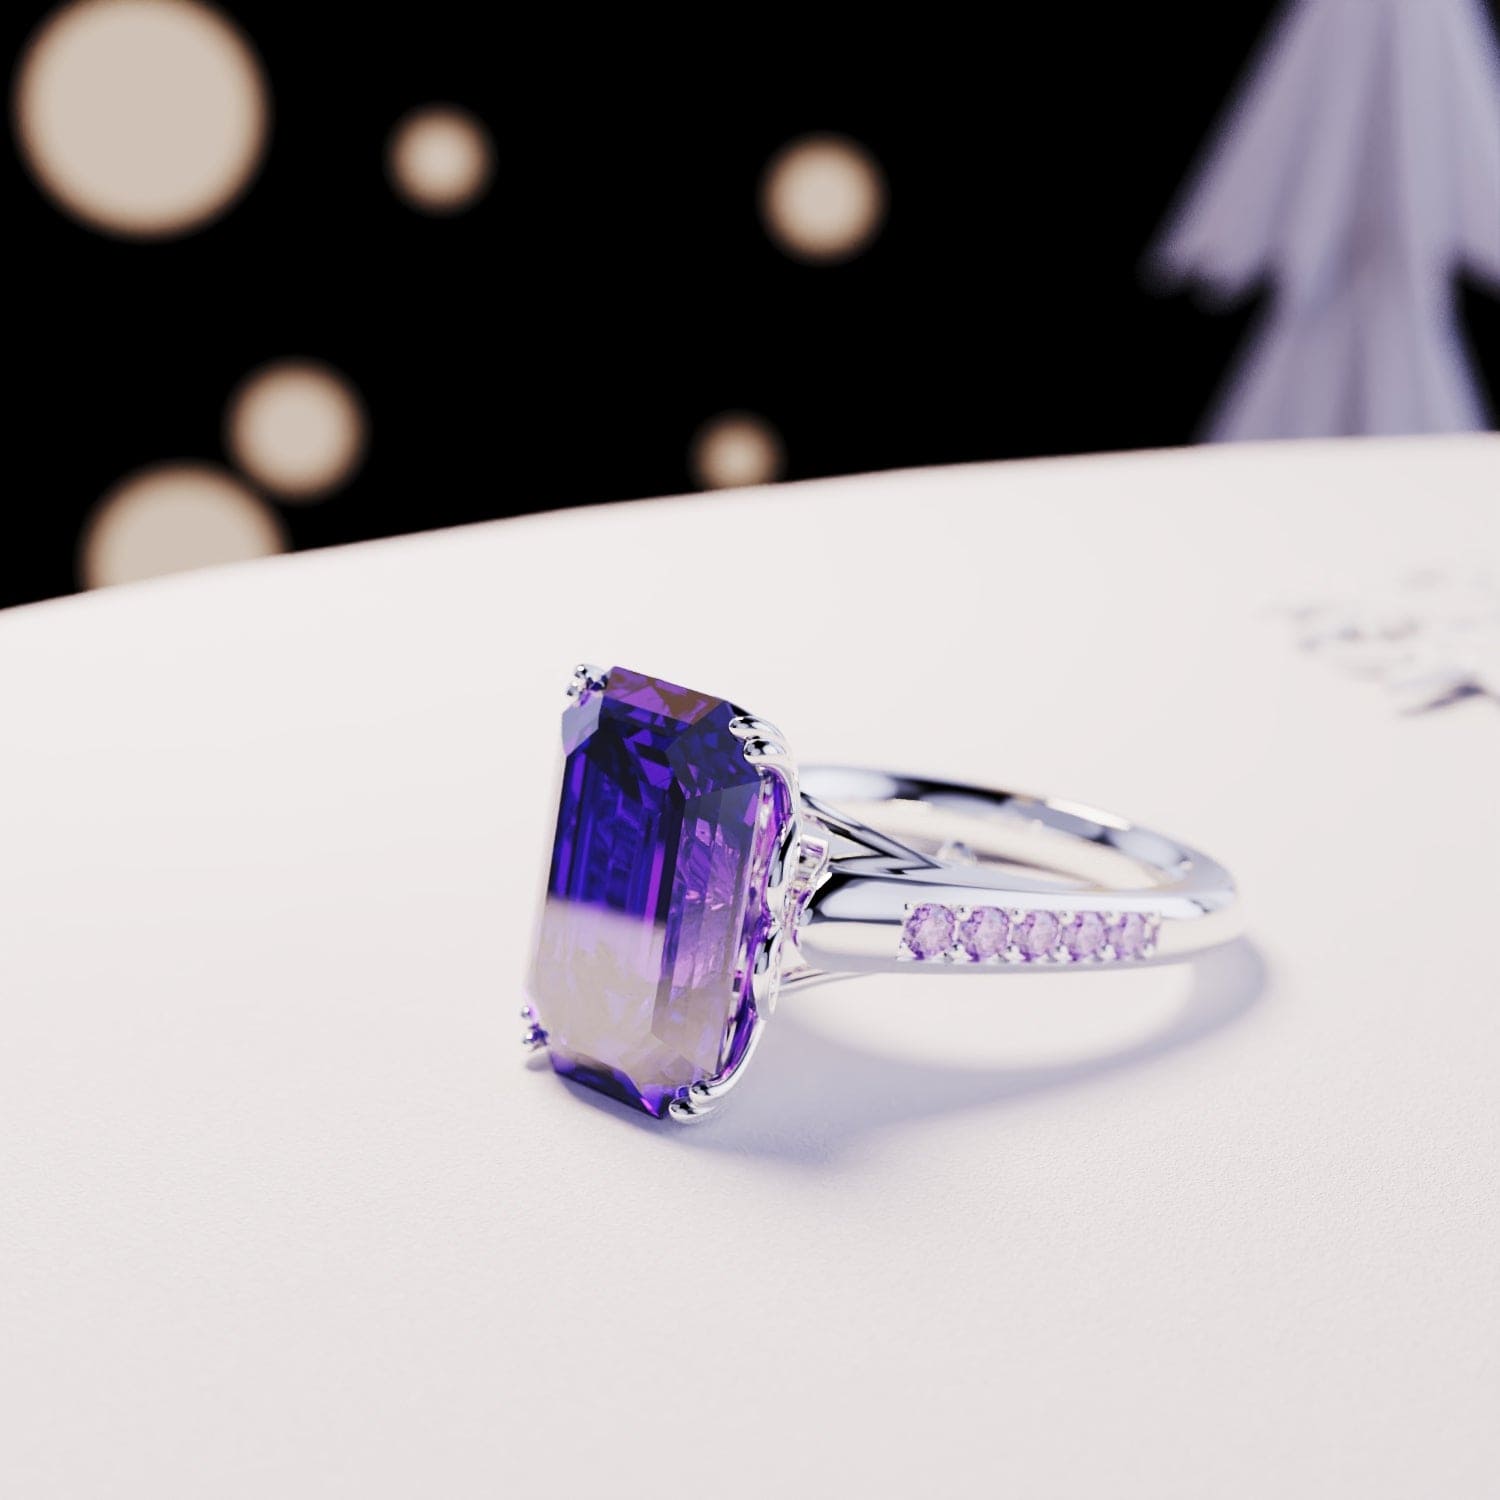 Violet Dream: Emerald-Cut Sculpted Ring - S925 Sterling Silver